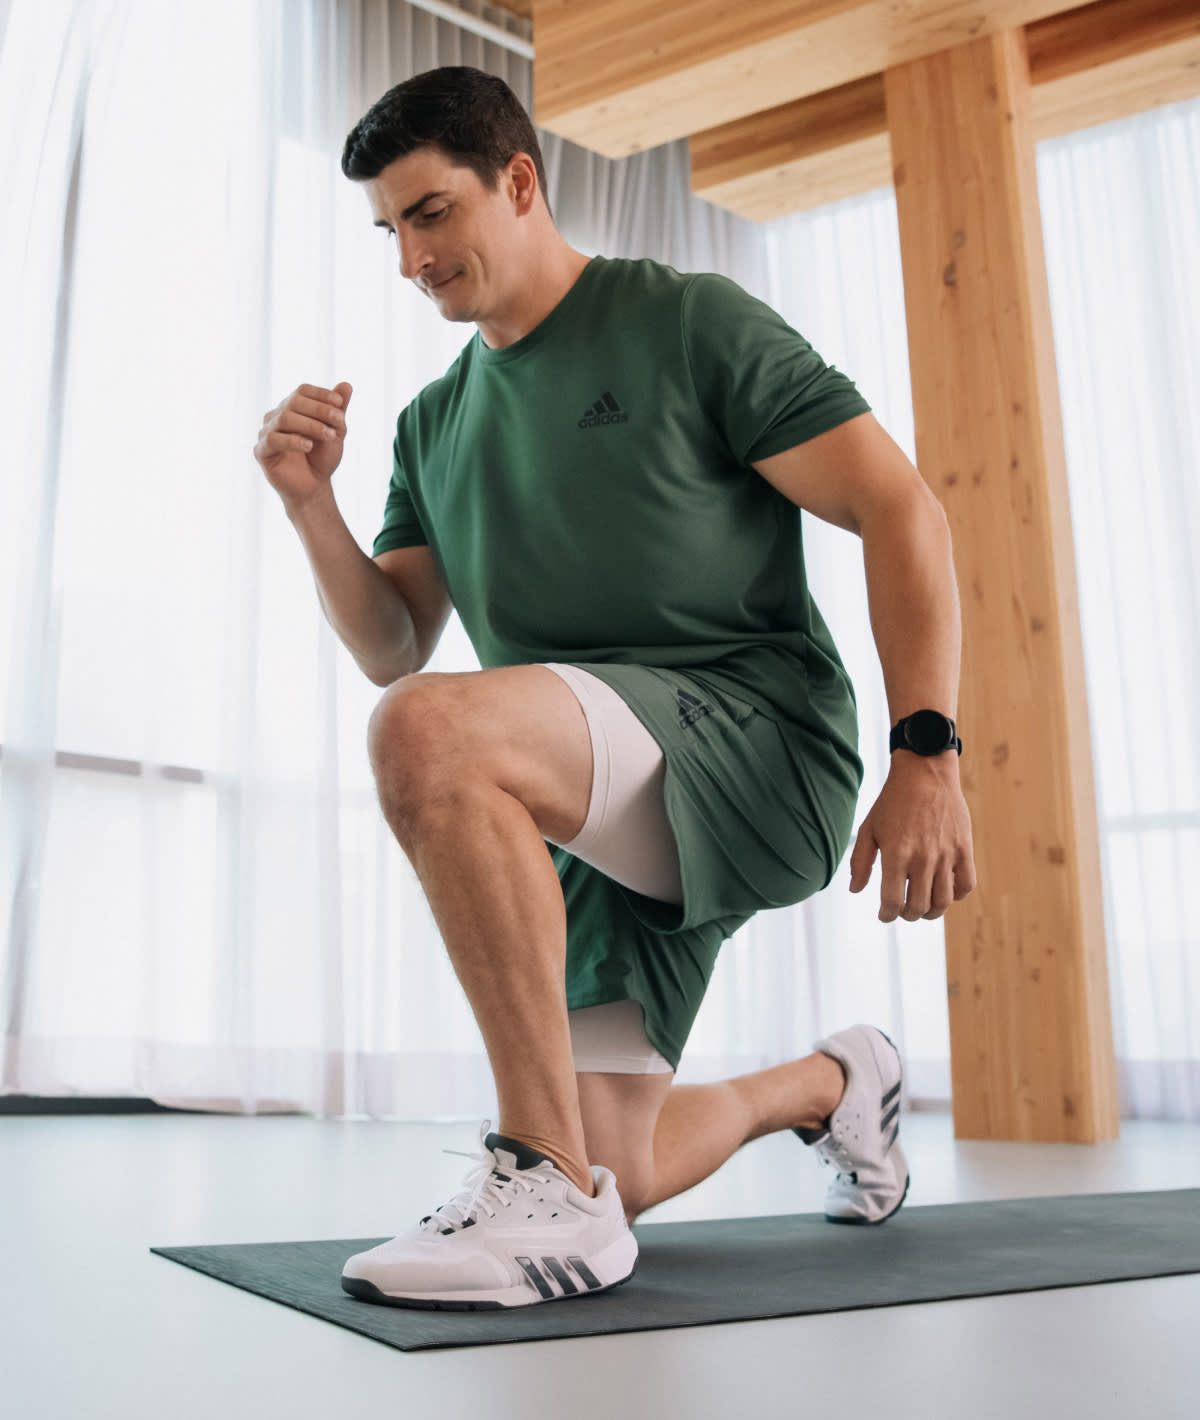 8 Best Bodyweight Exercises for Biceps and Triceps - Nutrisense Journal